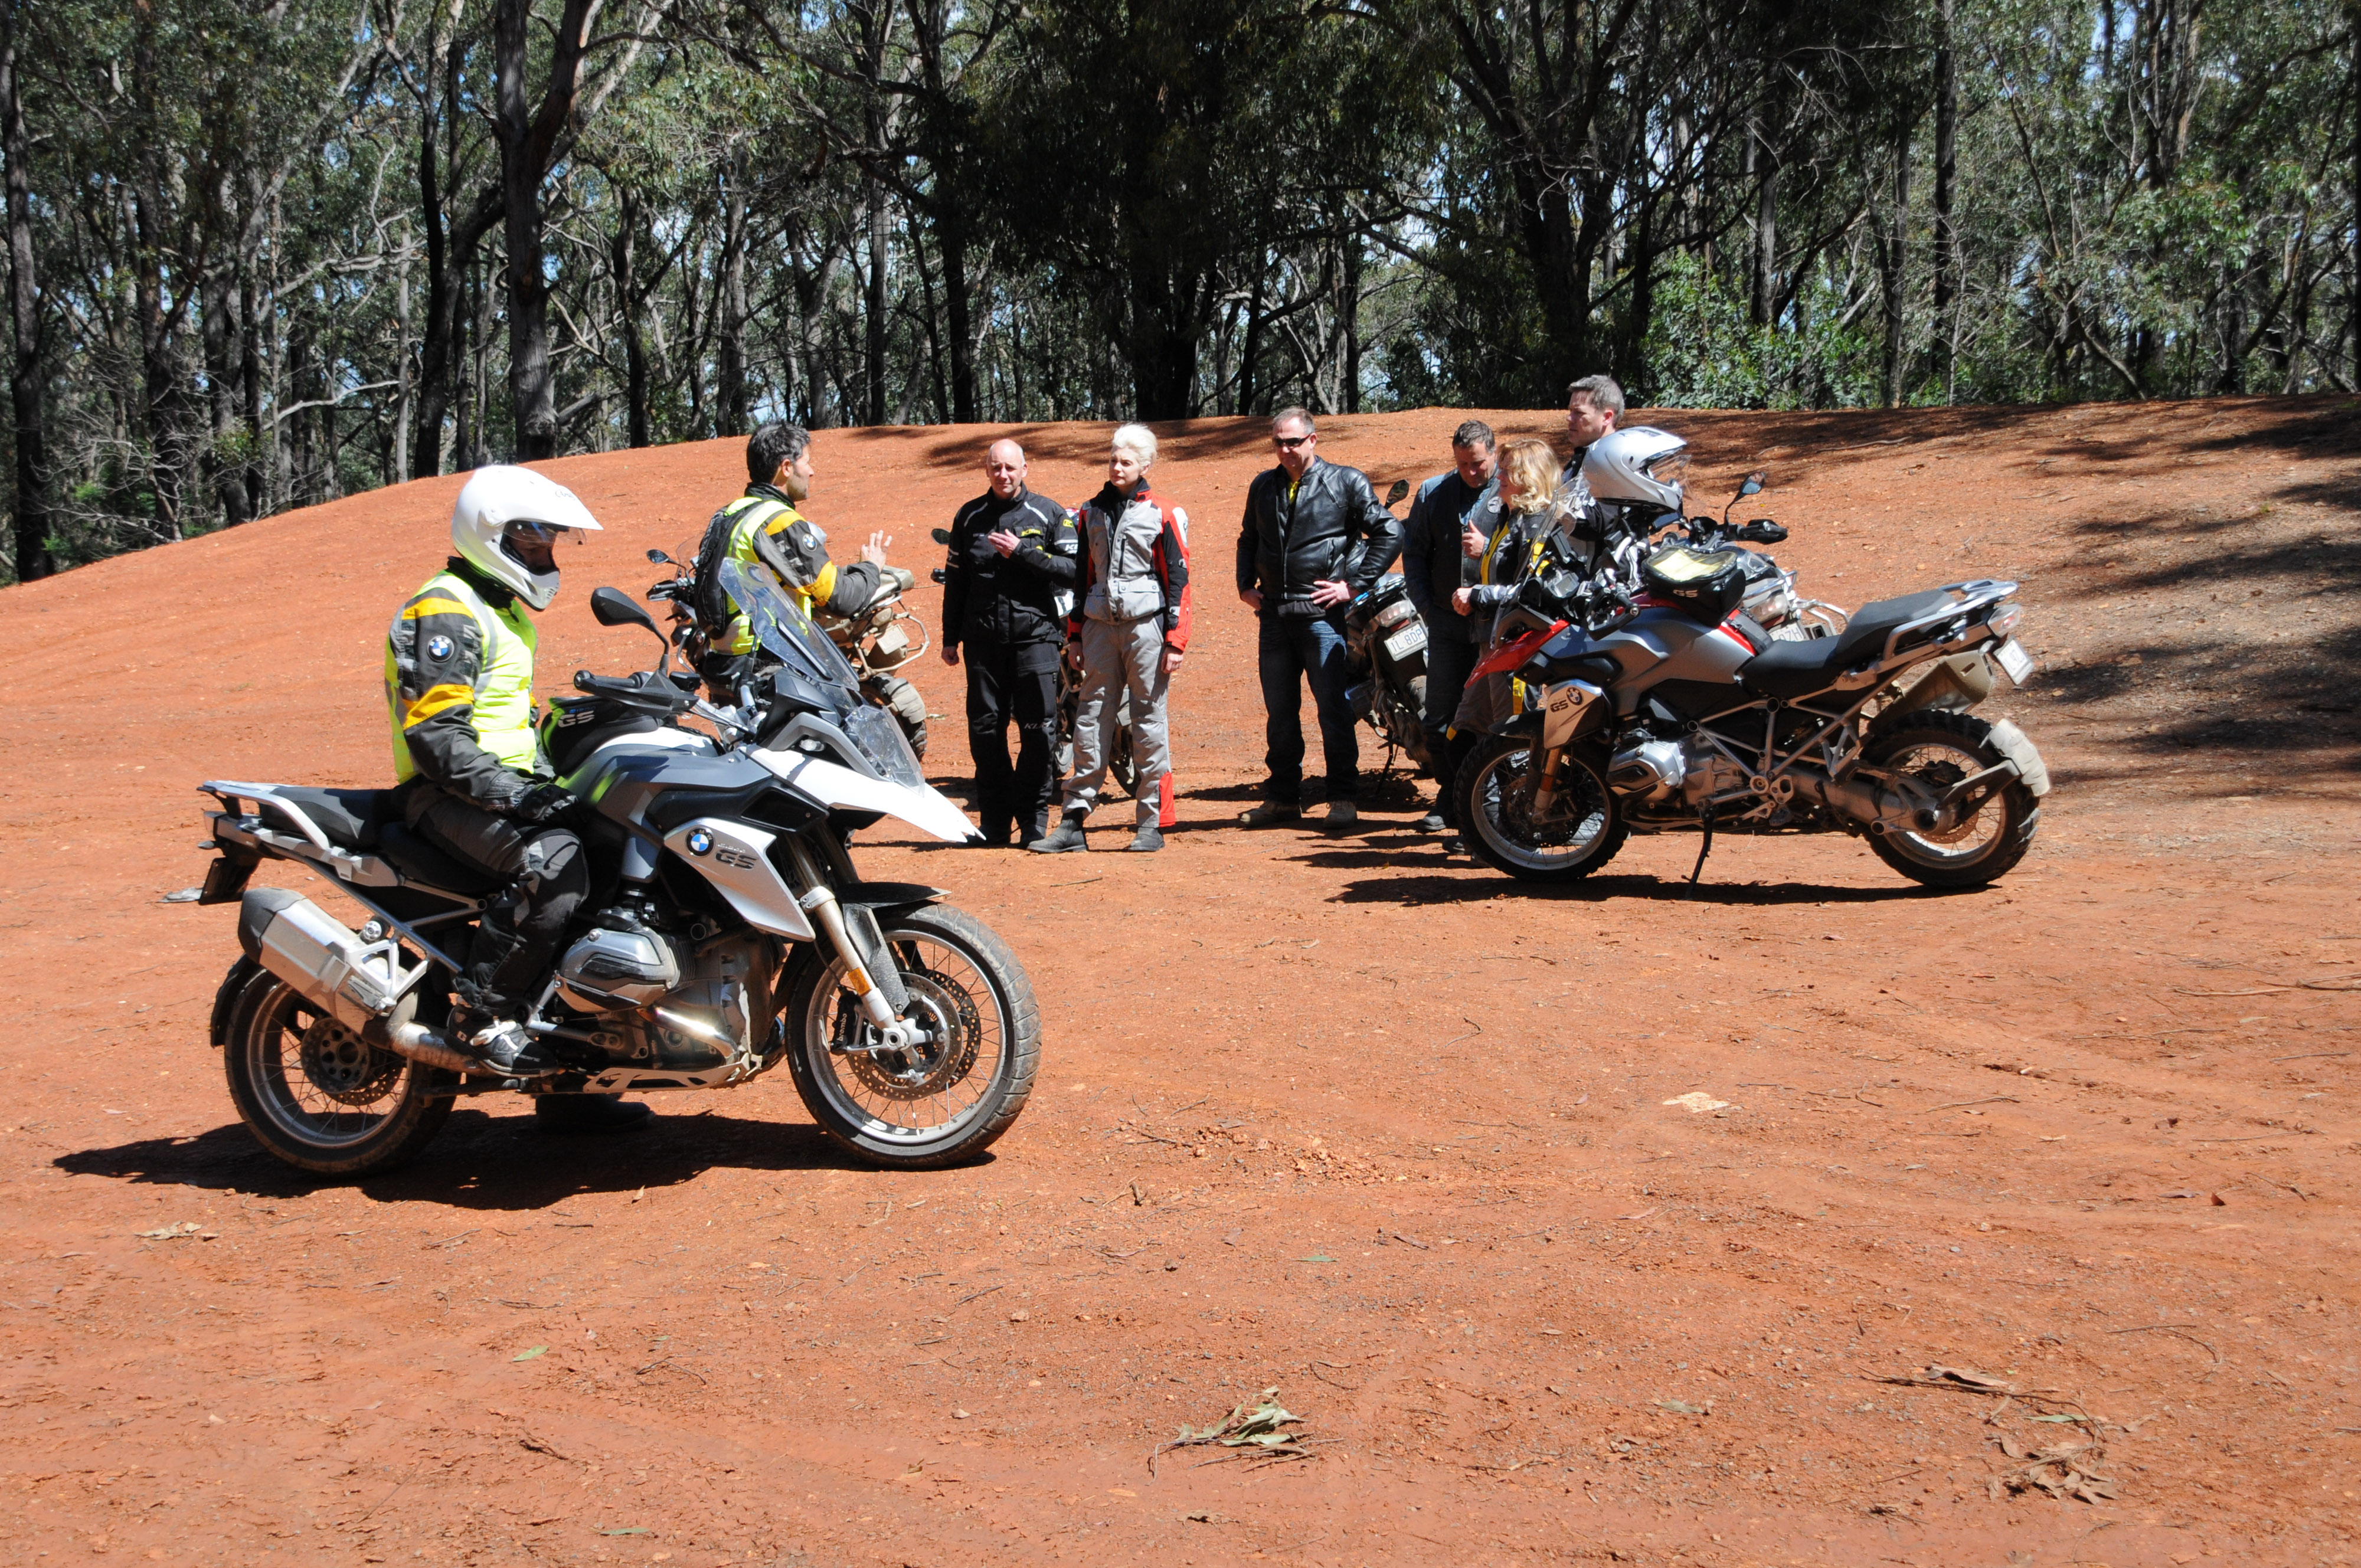 The BMW Motorrad GS Experience - Test ride the legend 